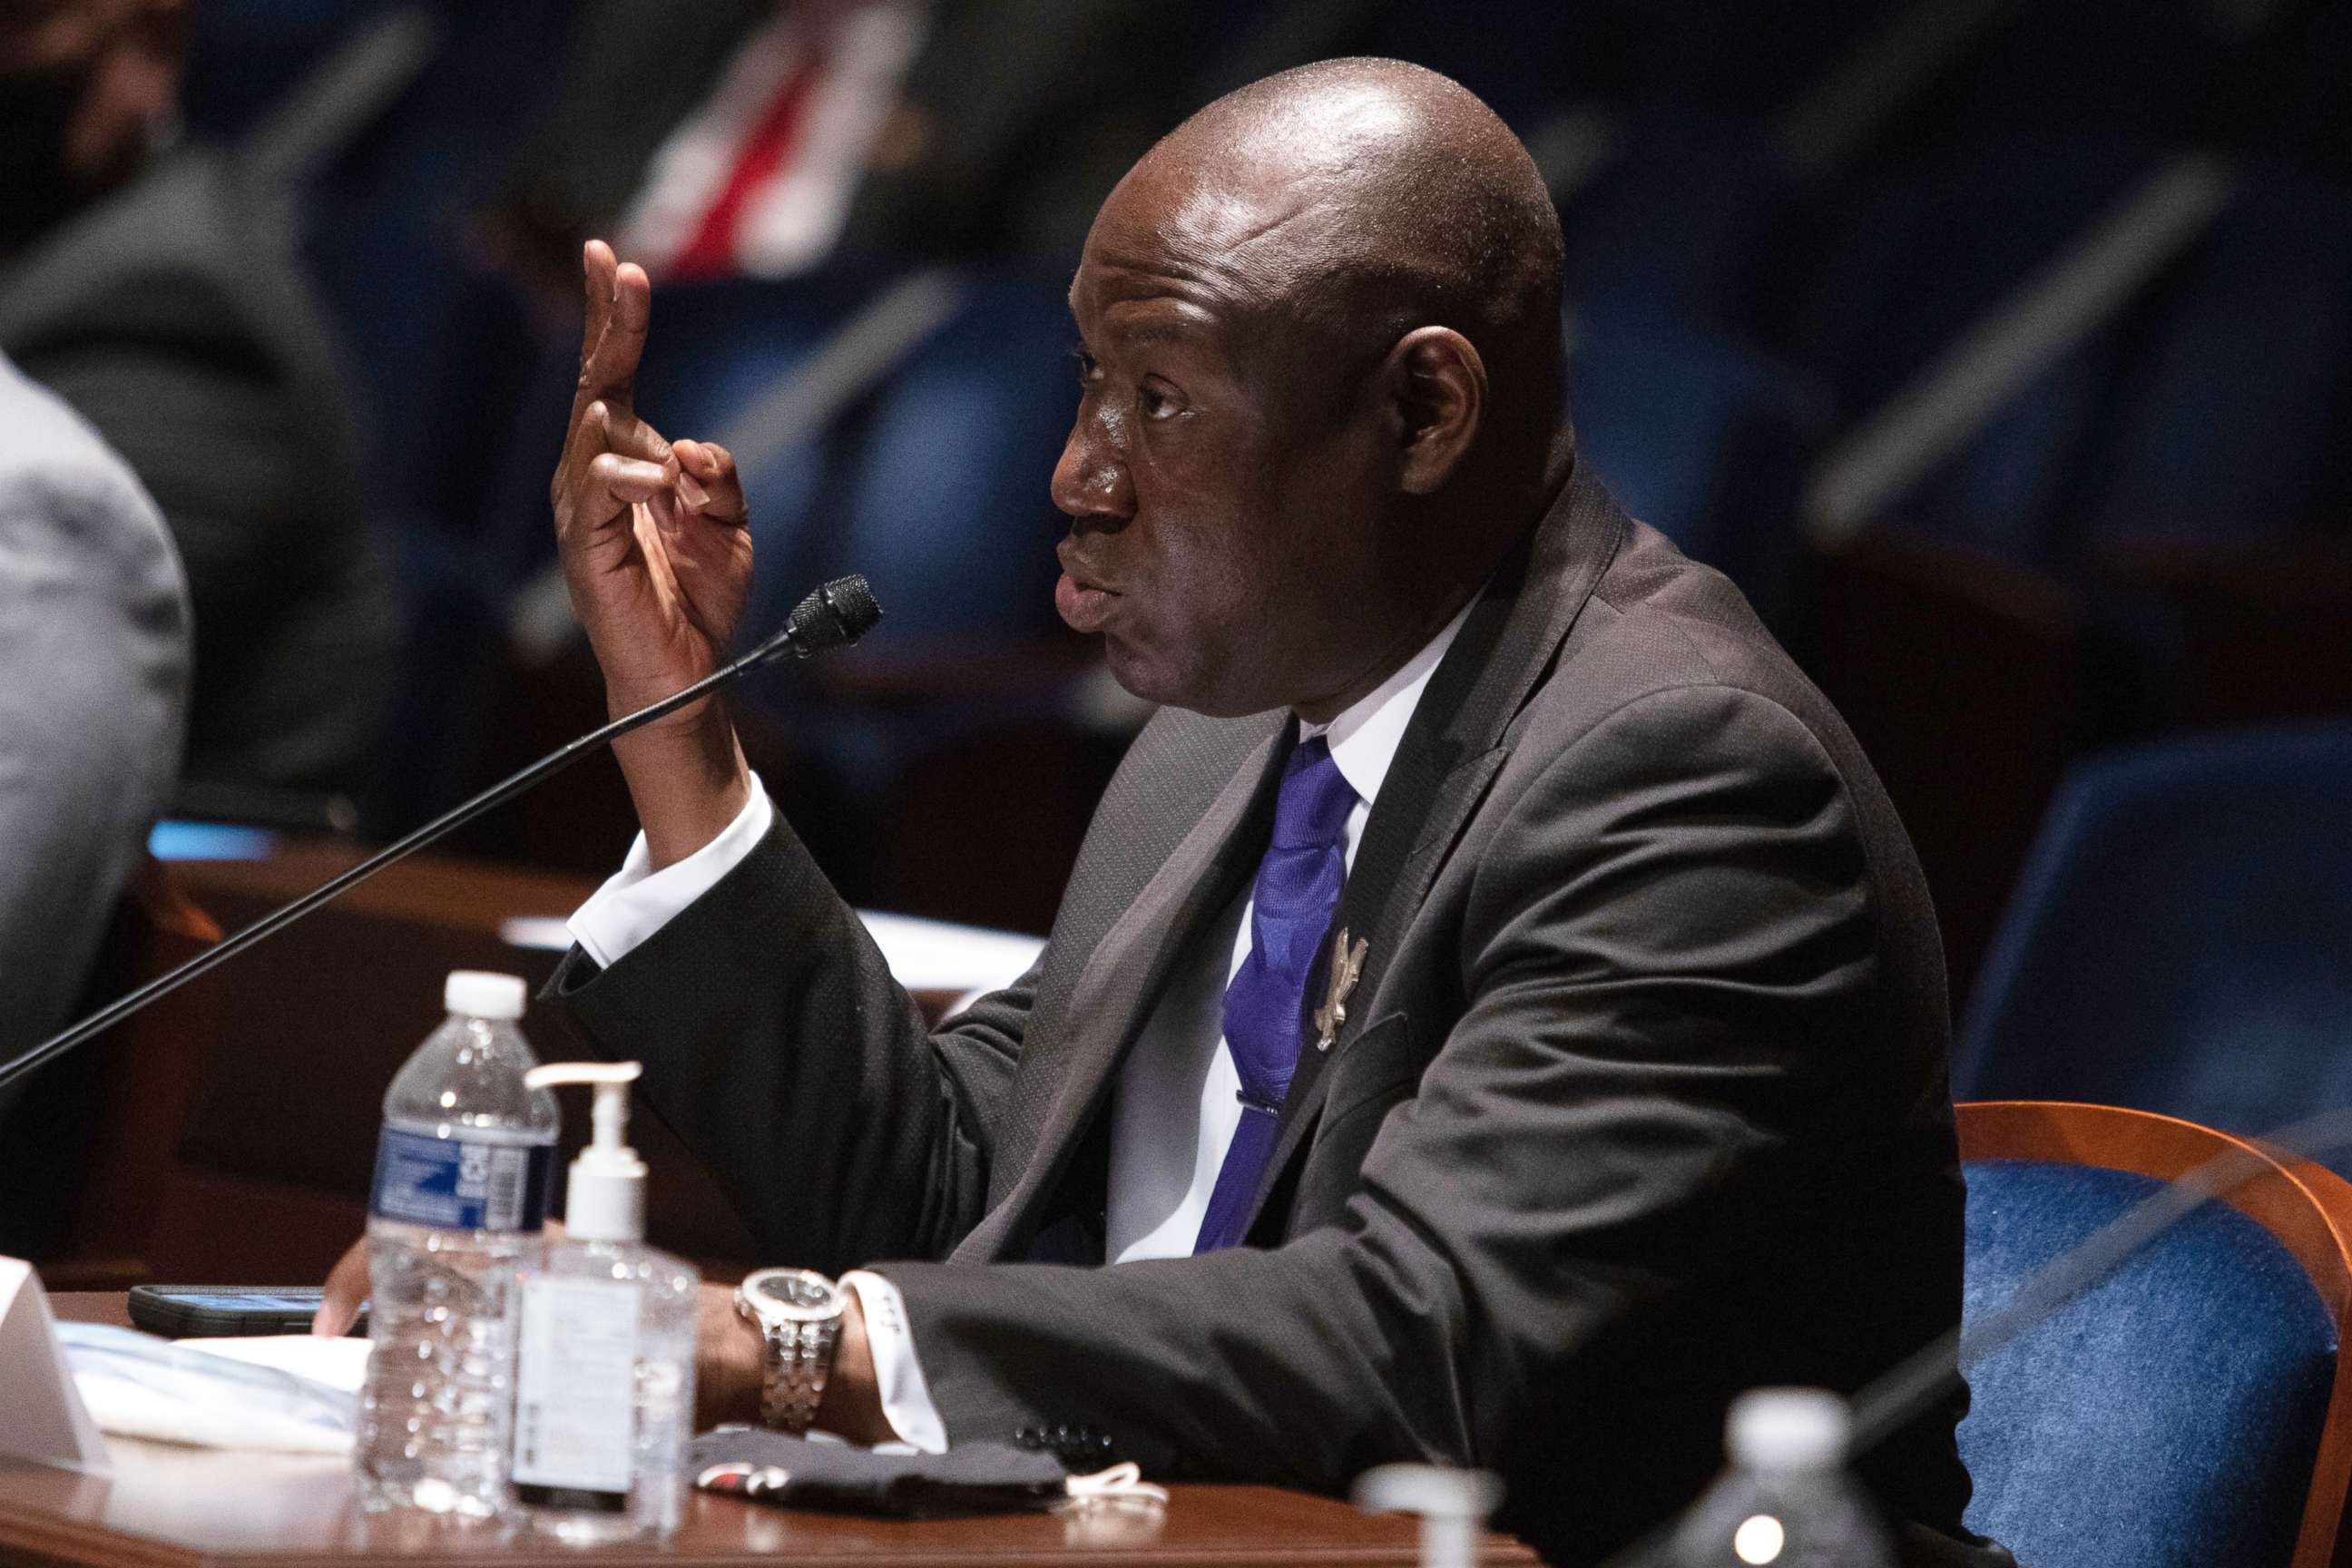 PHOTO: Civil rights attorney Ben Crump speaks during a House Judiciary Committee hearing on proposed changes to police practices and accountability on Capitol Hill, Wednesday, June 10, 2020, in Washington.